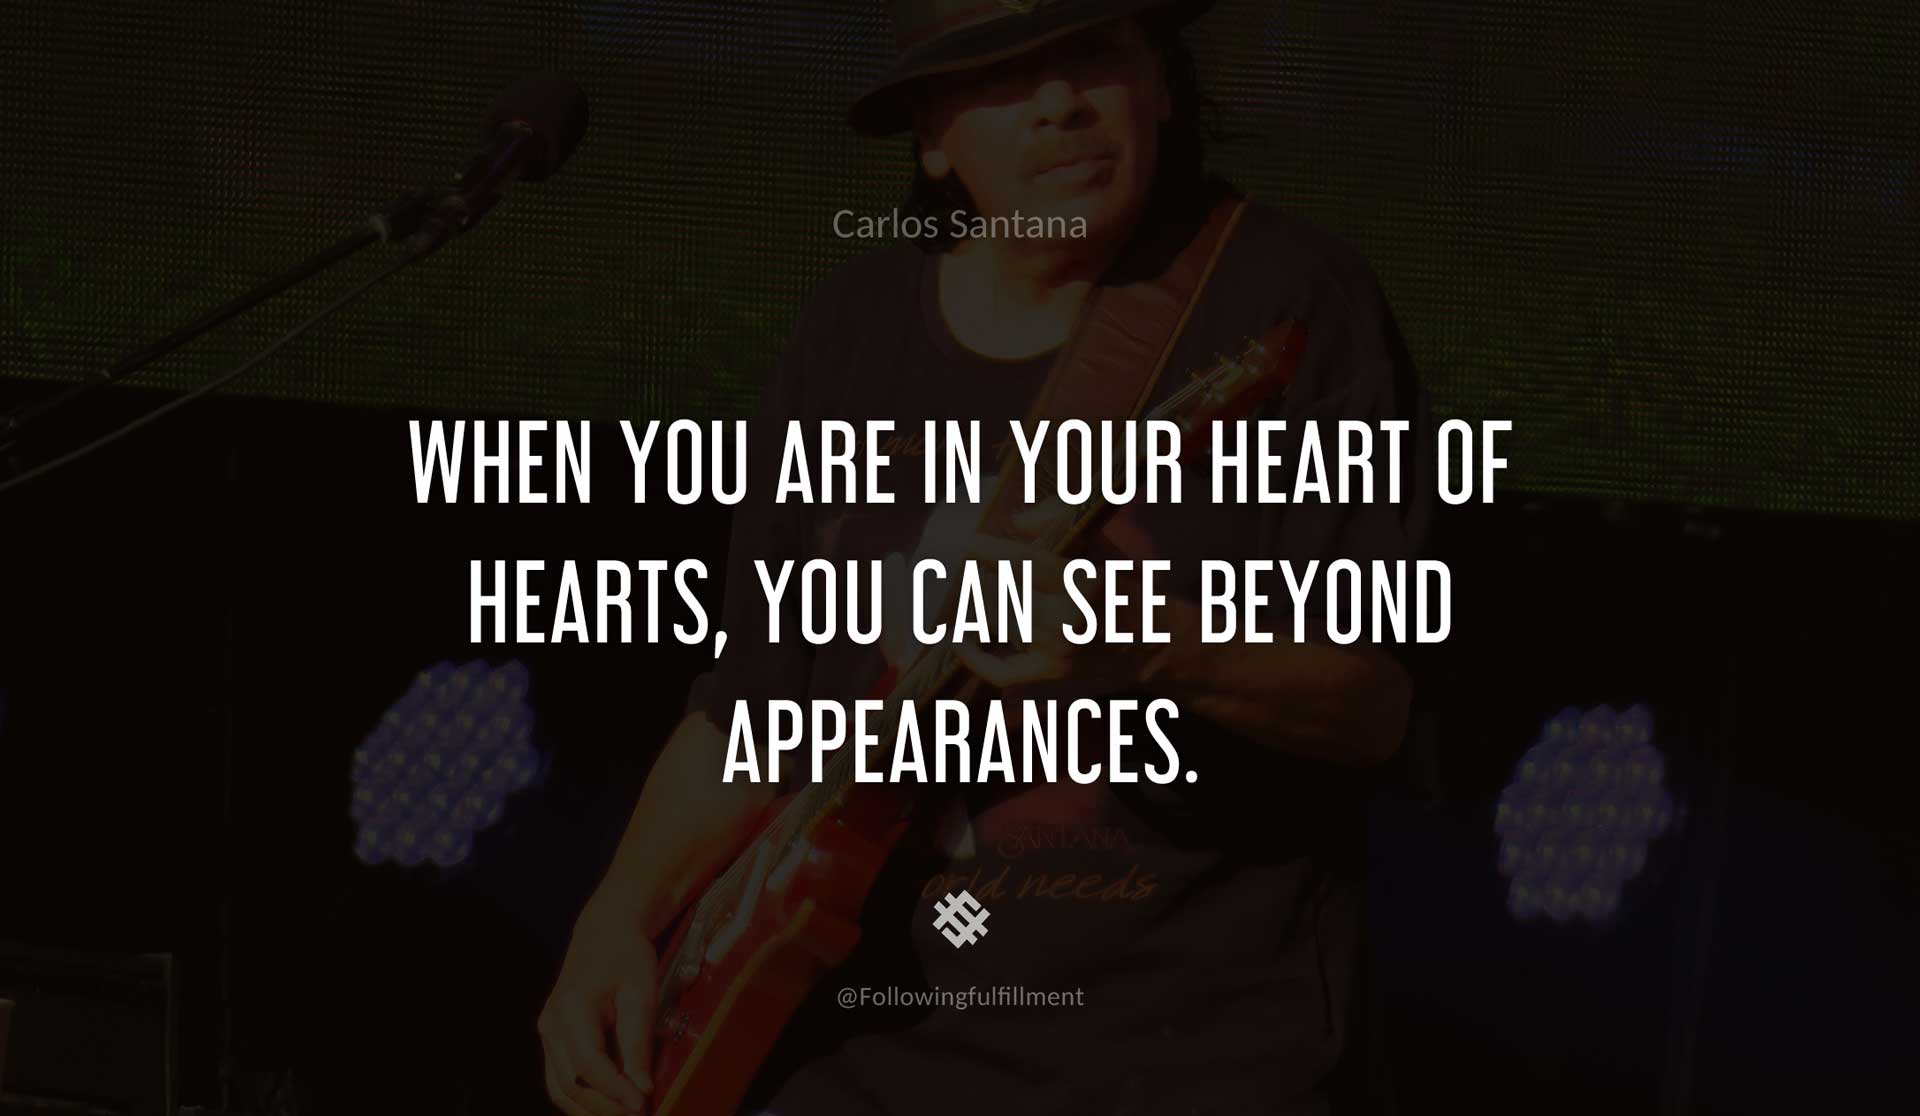 When-you-are-in-your-heart-of-hearts,-you-can-see-beyond-appearances.-CARLOS-SANTANA-Quote.jpg